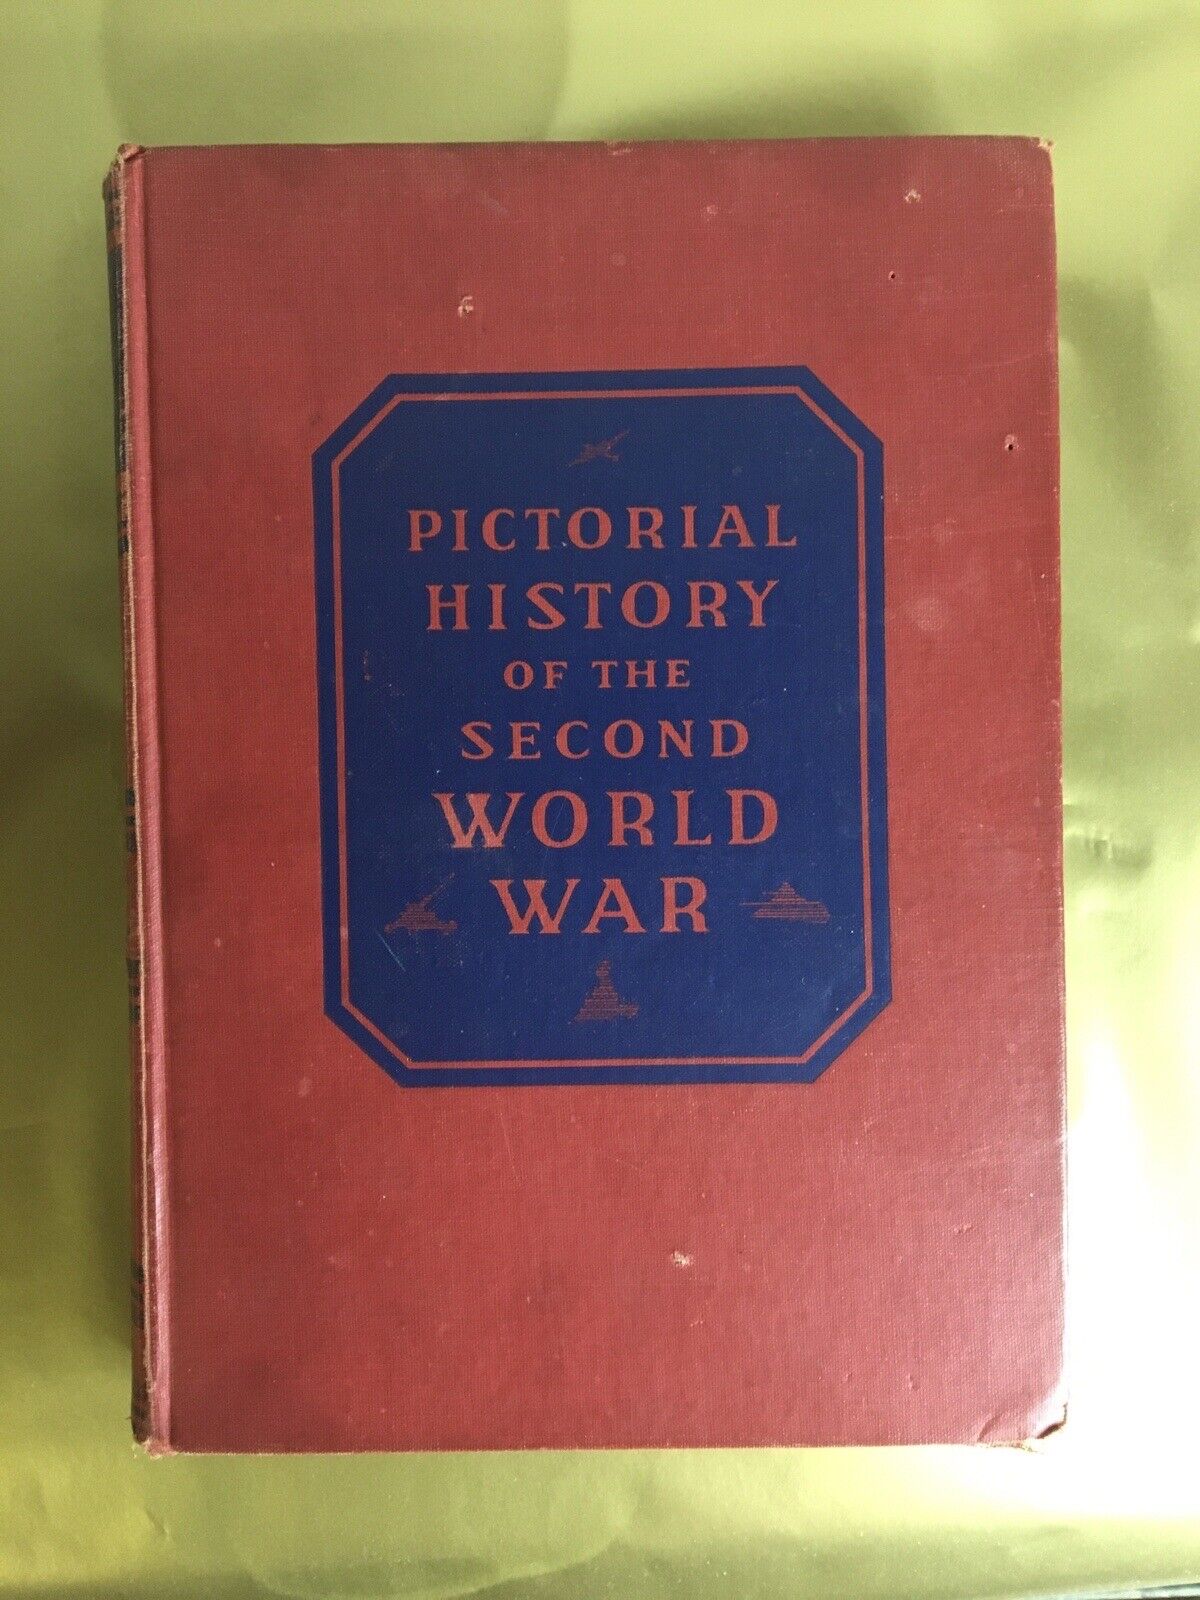 FIRST EDITION  Vol 2 RARE Pictorial History of the Second World War Unseen Pics